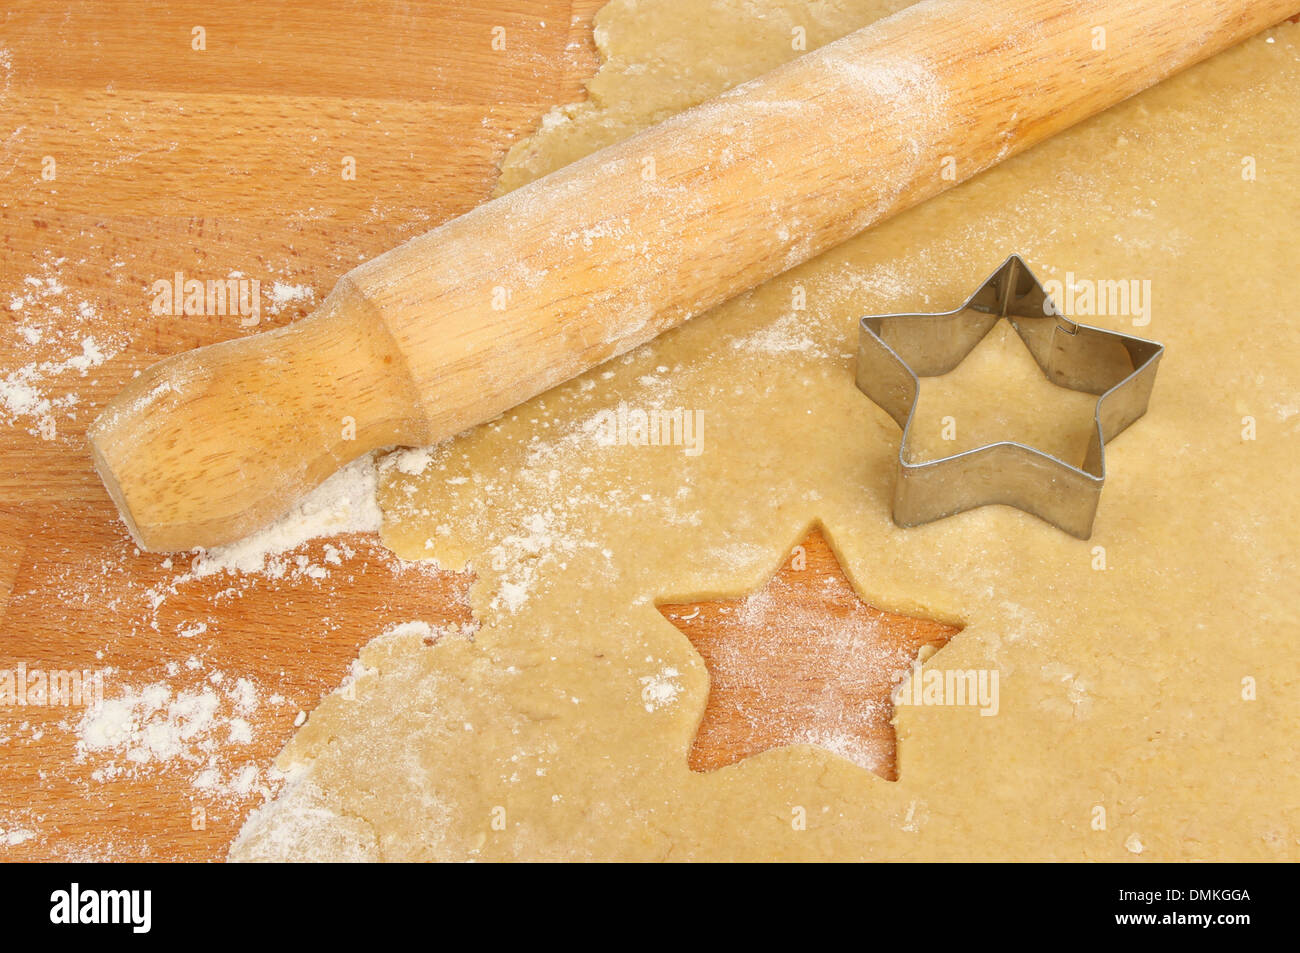 https://c8.alamy.com/comp/DMKGGA/christmas-star-pastry-cutter-on-rolled-sweet-pastry-with-a-rolling-DMKGGA.jpg